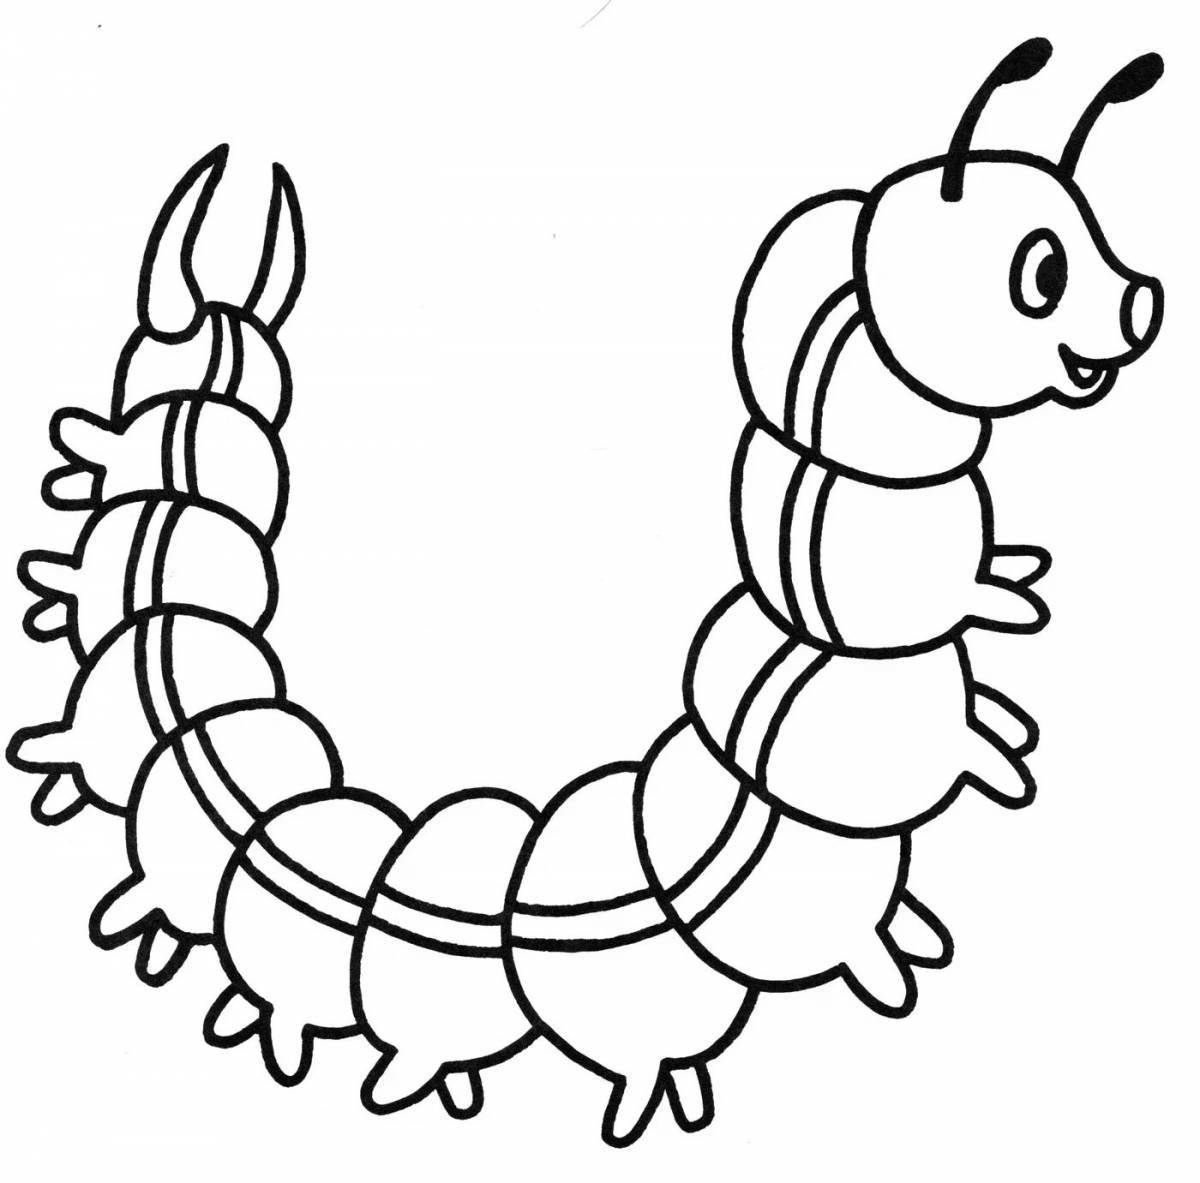 Coloring pages for kids playful centipede